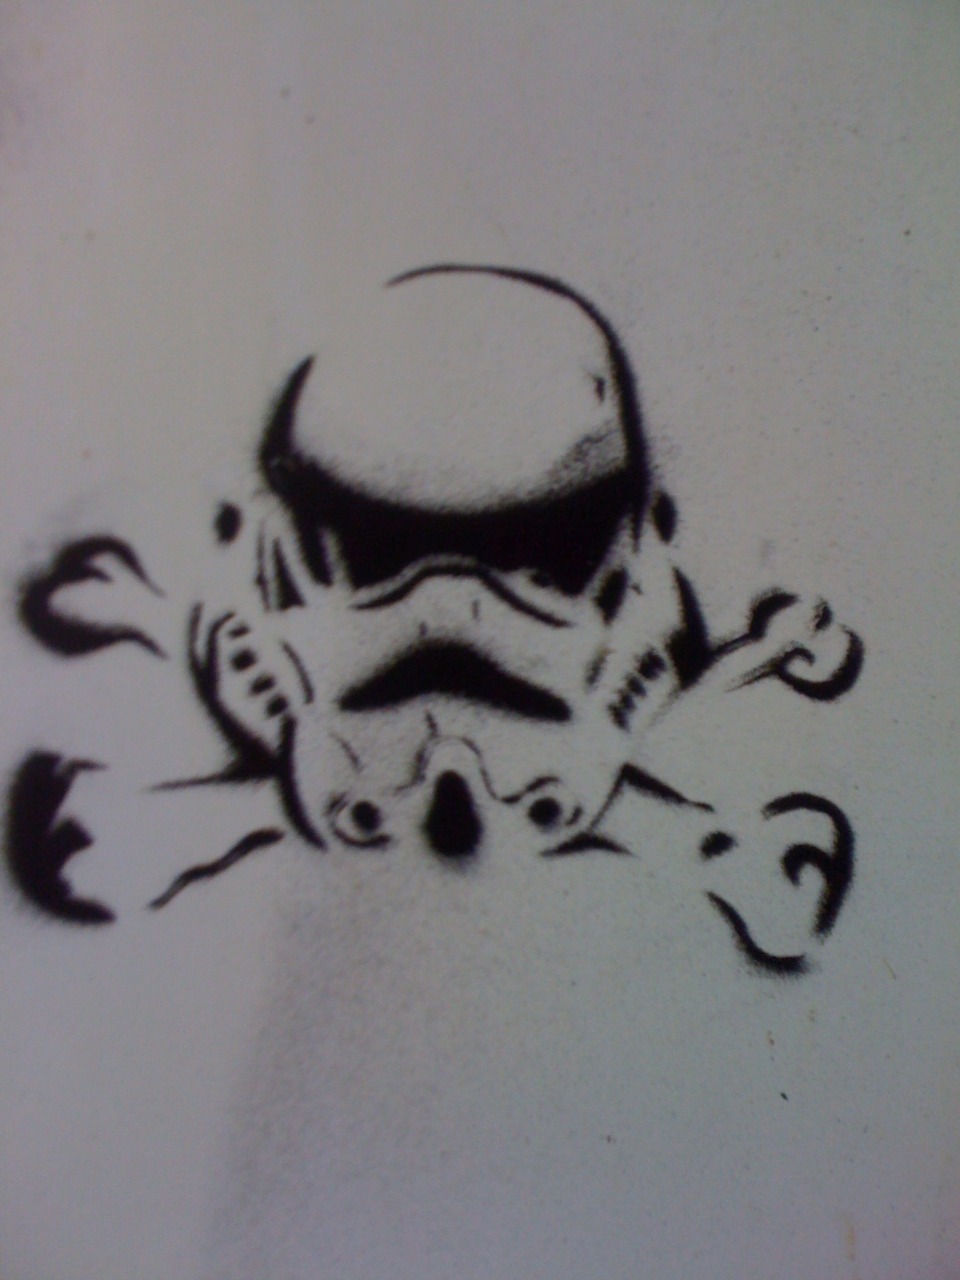 
Stormtrooper Jolly Rogers Cut Out
Spray on Refrigerator; Canvas; T-Shirt
